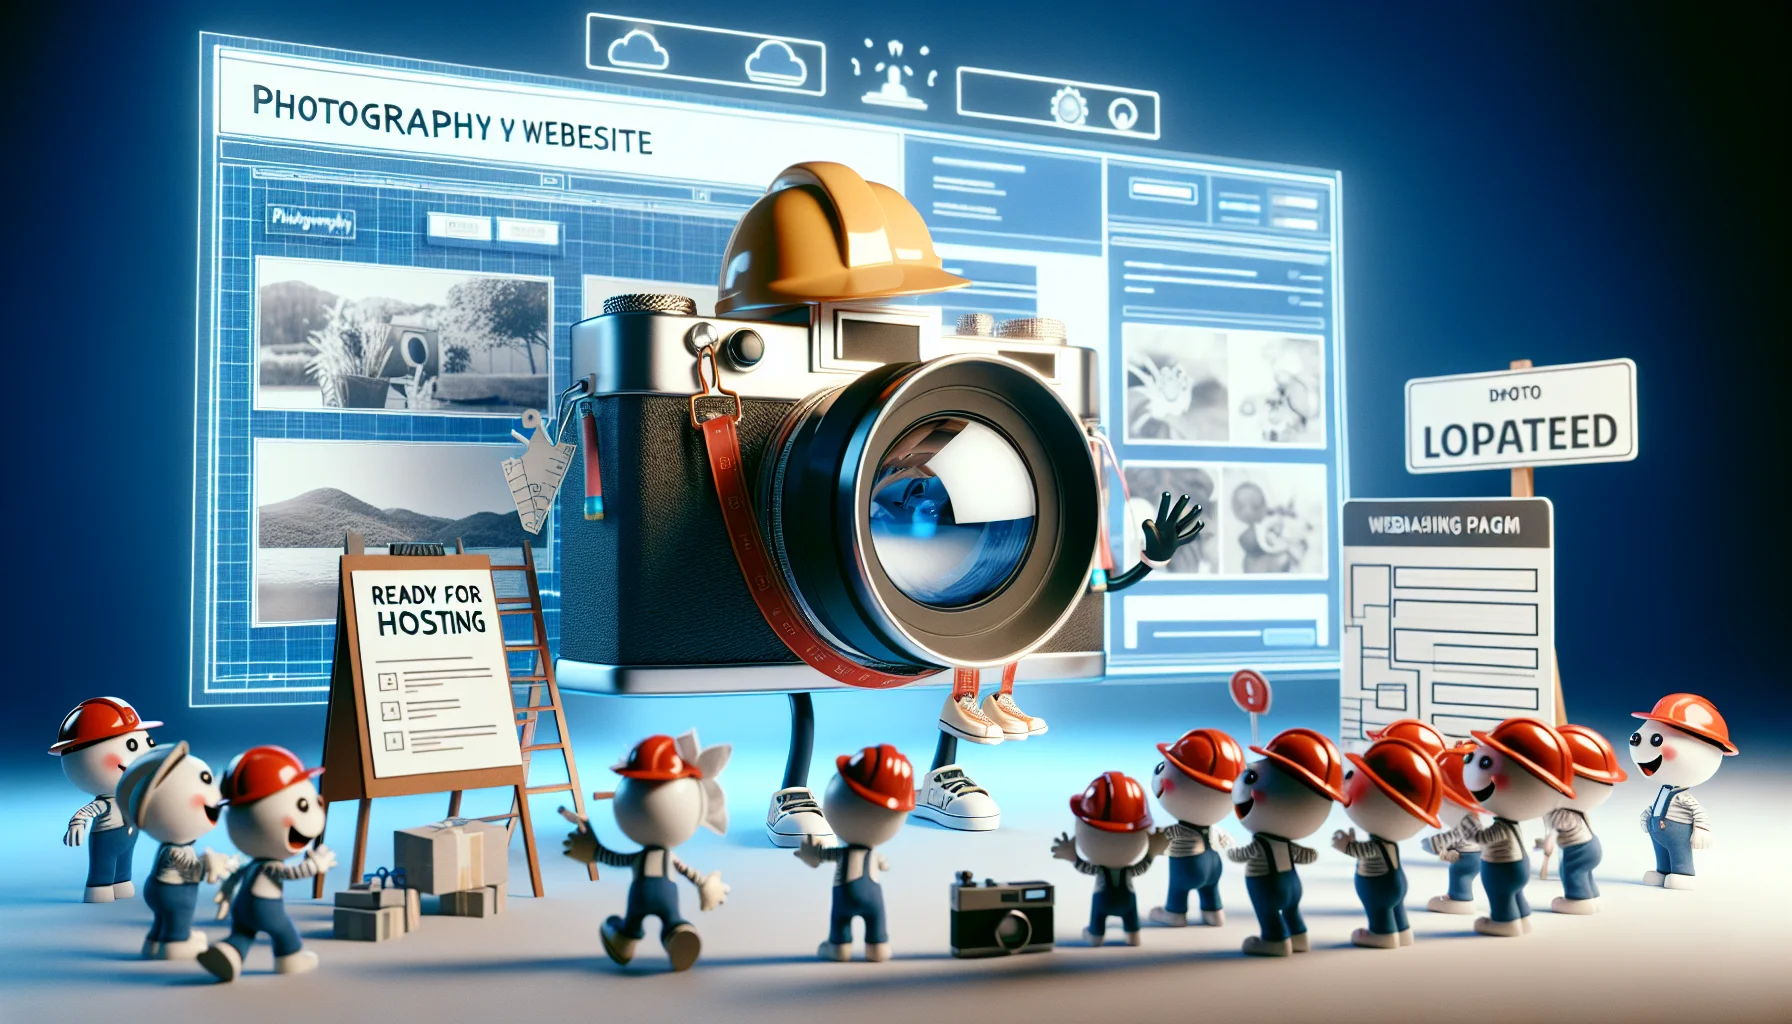 Imagine a humorous scene, where an anthropomorphic camera character is enthusiastically building a photography website. It’s wearing a small hard hat and looking at a blueprint that says 'Photography Website' on it. There's a blueprint of a website landing page, full of design elements like a header, image sliders, and gallery sections. Nearby, a group of small caricatures symbolizing images, videos, and other media files, are cheerfully waiting in a queue to be uploaded. They're holding a banner that says 'Ready for Hosting'. The entire scene is set against a sleek, digital backdrop to accentuate the technological context.